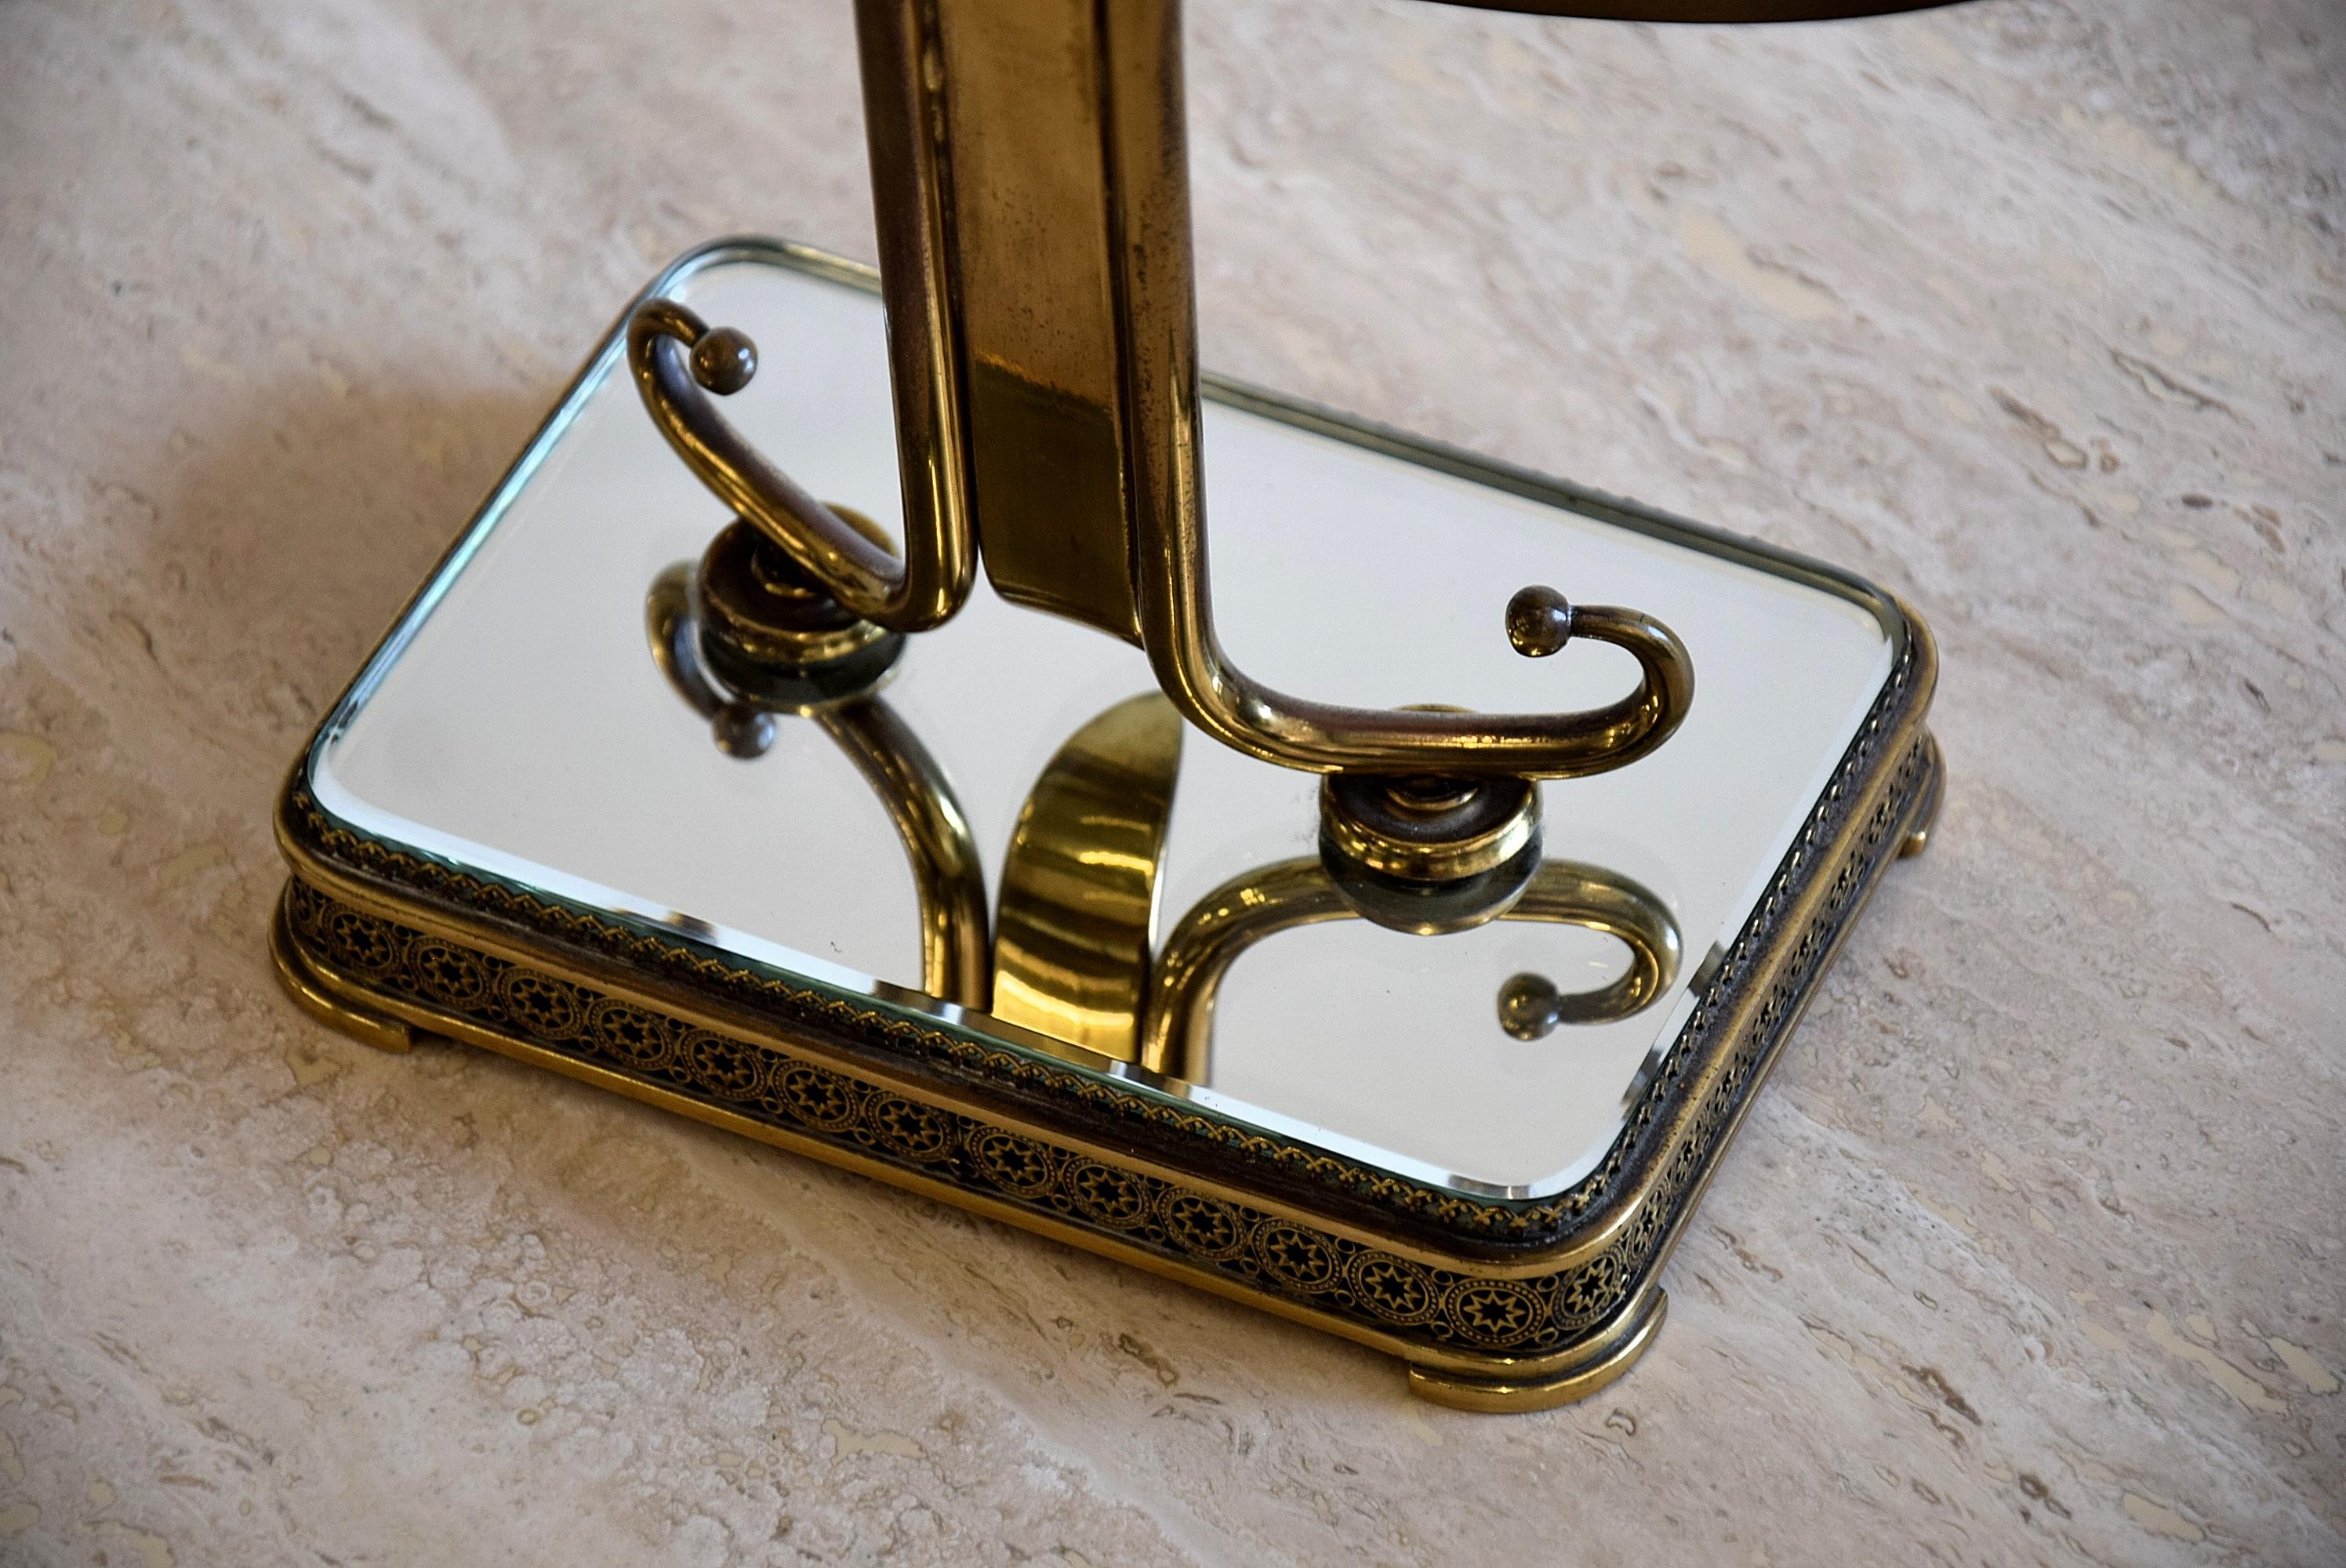 Absolute gorgeous Italian brass vanity mirror from the 1940s with beautiful details.

The mirror will be shipped insured in a custom made wooden crate. Cost of insured transport to the US crate included is euro 195.